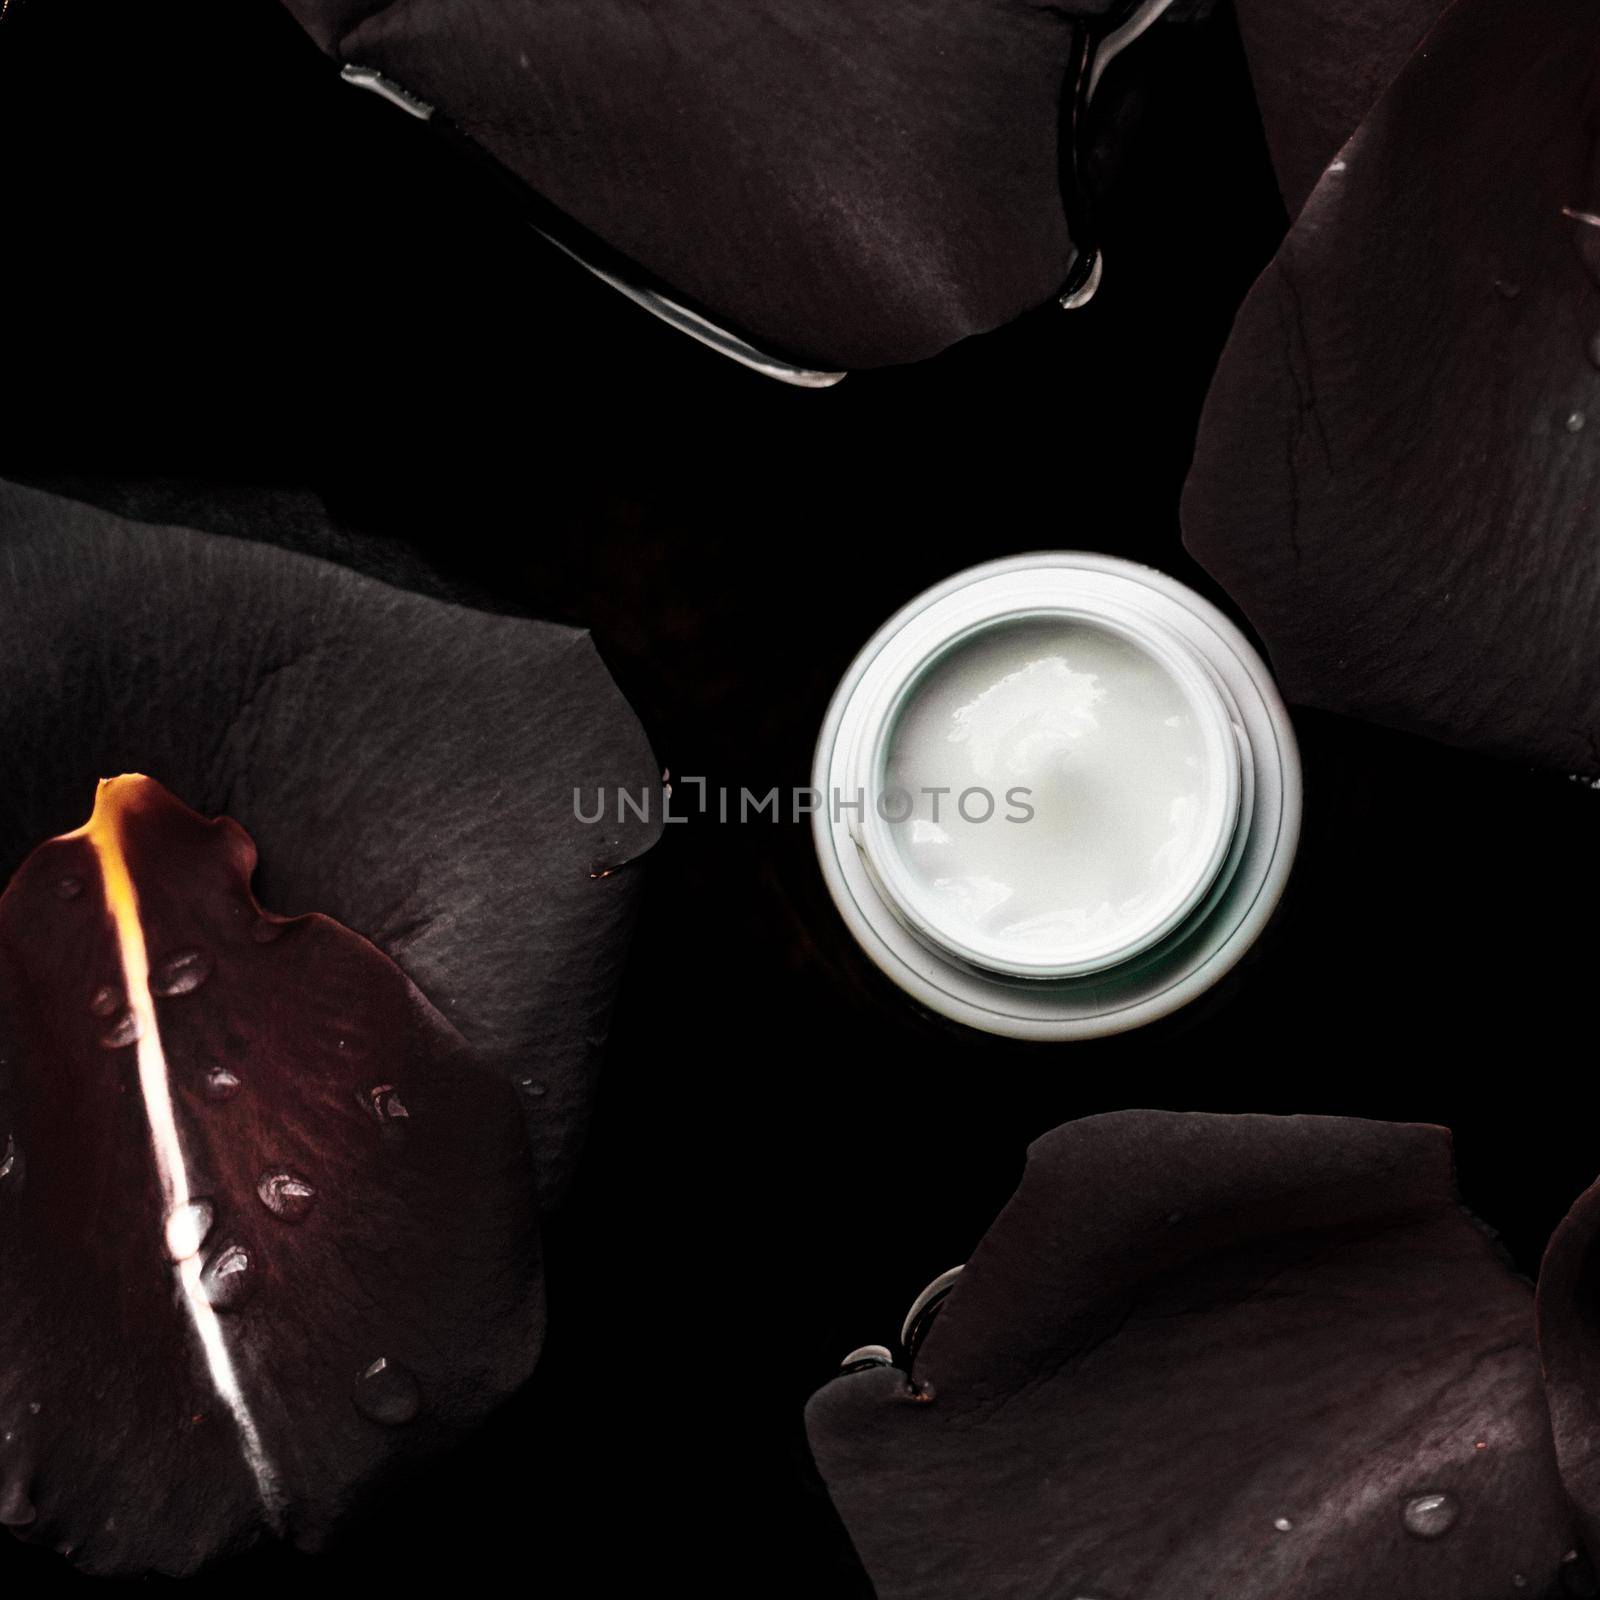 beauty cream jar and flower petals - cosmetics with flowers styled concept